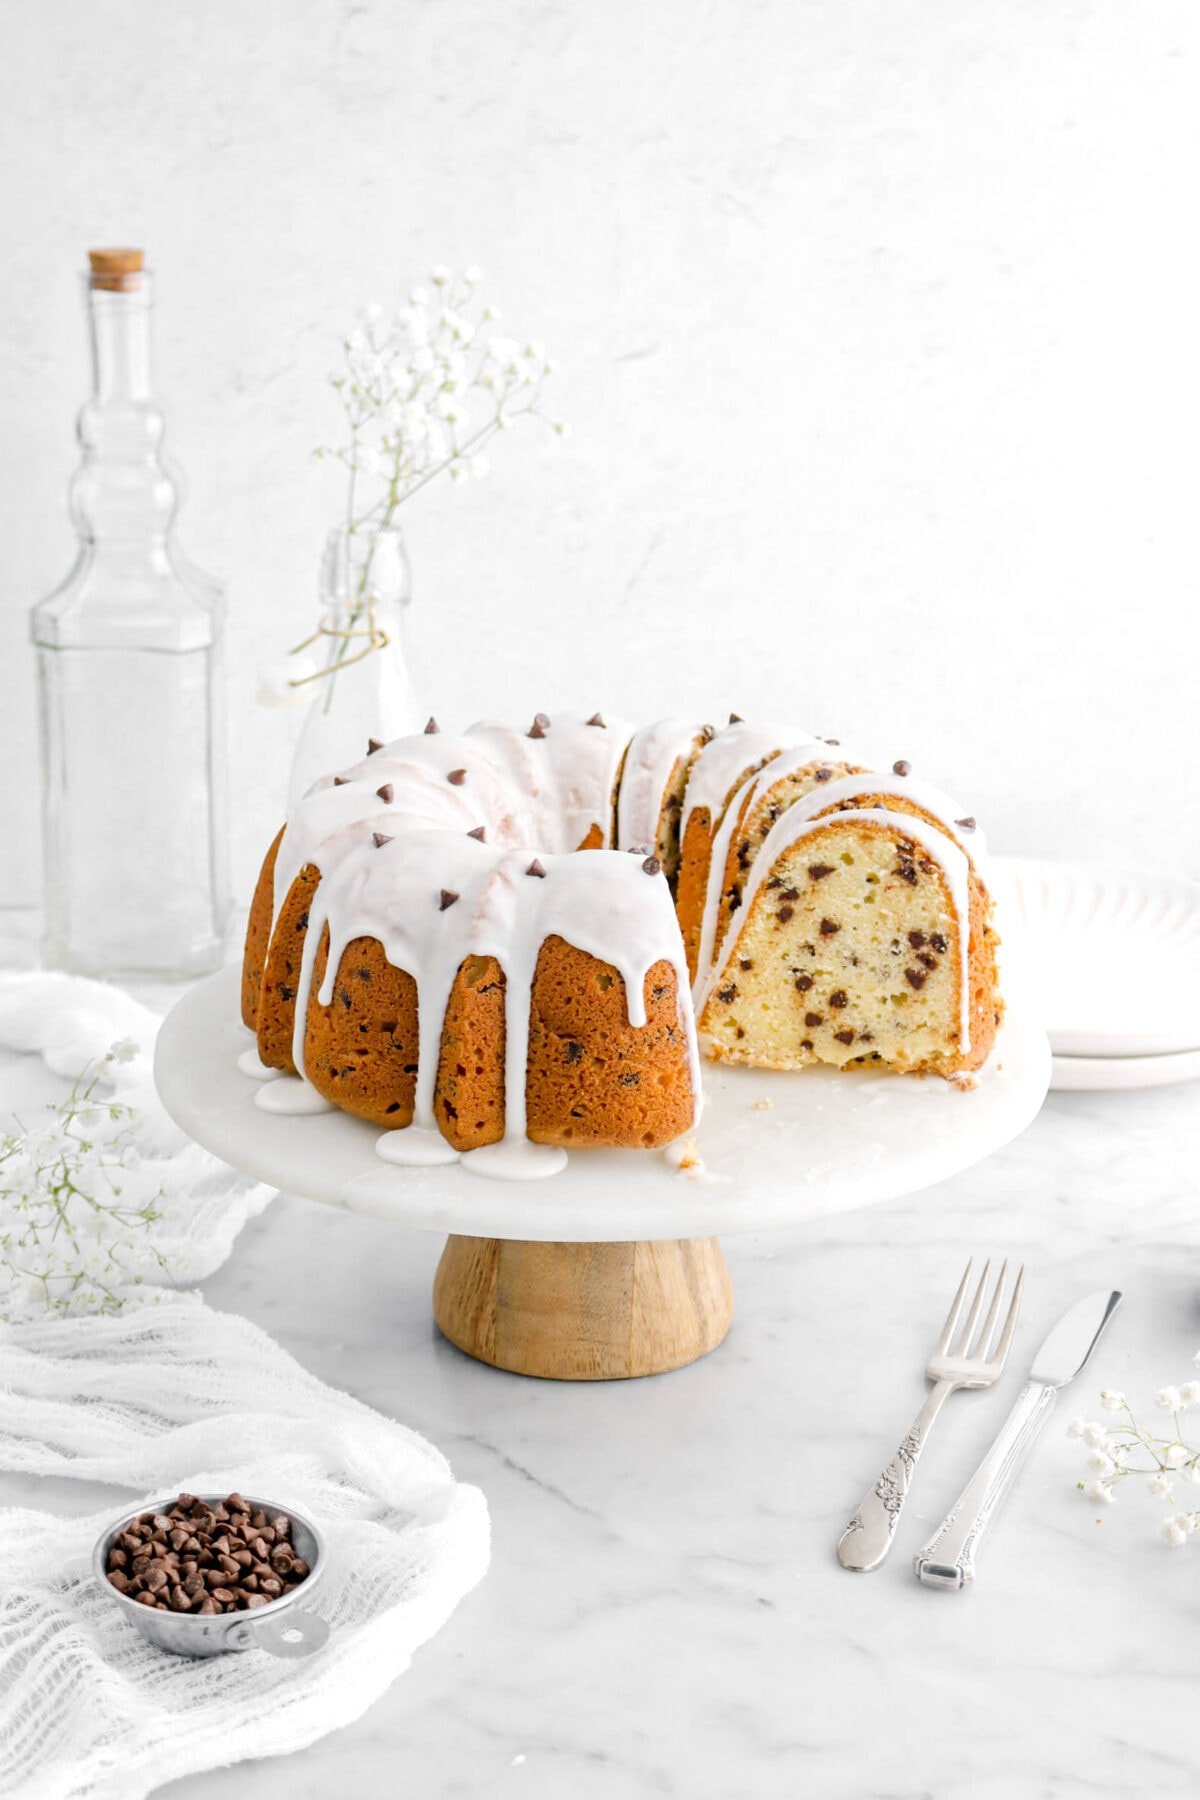 five slices of chocolate chip pound cake leaning against the rest of the cake on a cake stand, with stack of plates and empty glasses behind, a white cheesecloth beside, a measuring cup with mini chocolate chips, and a fork and knife beside on marble surface.